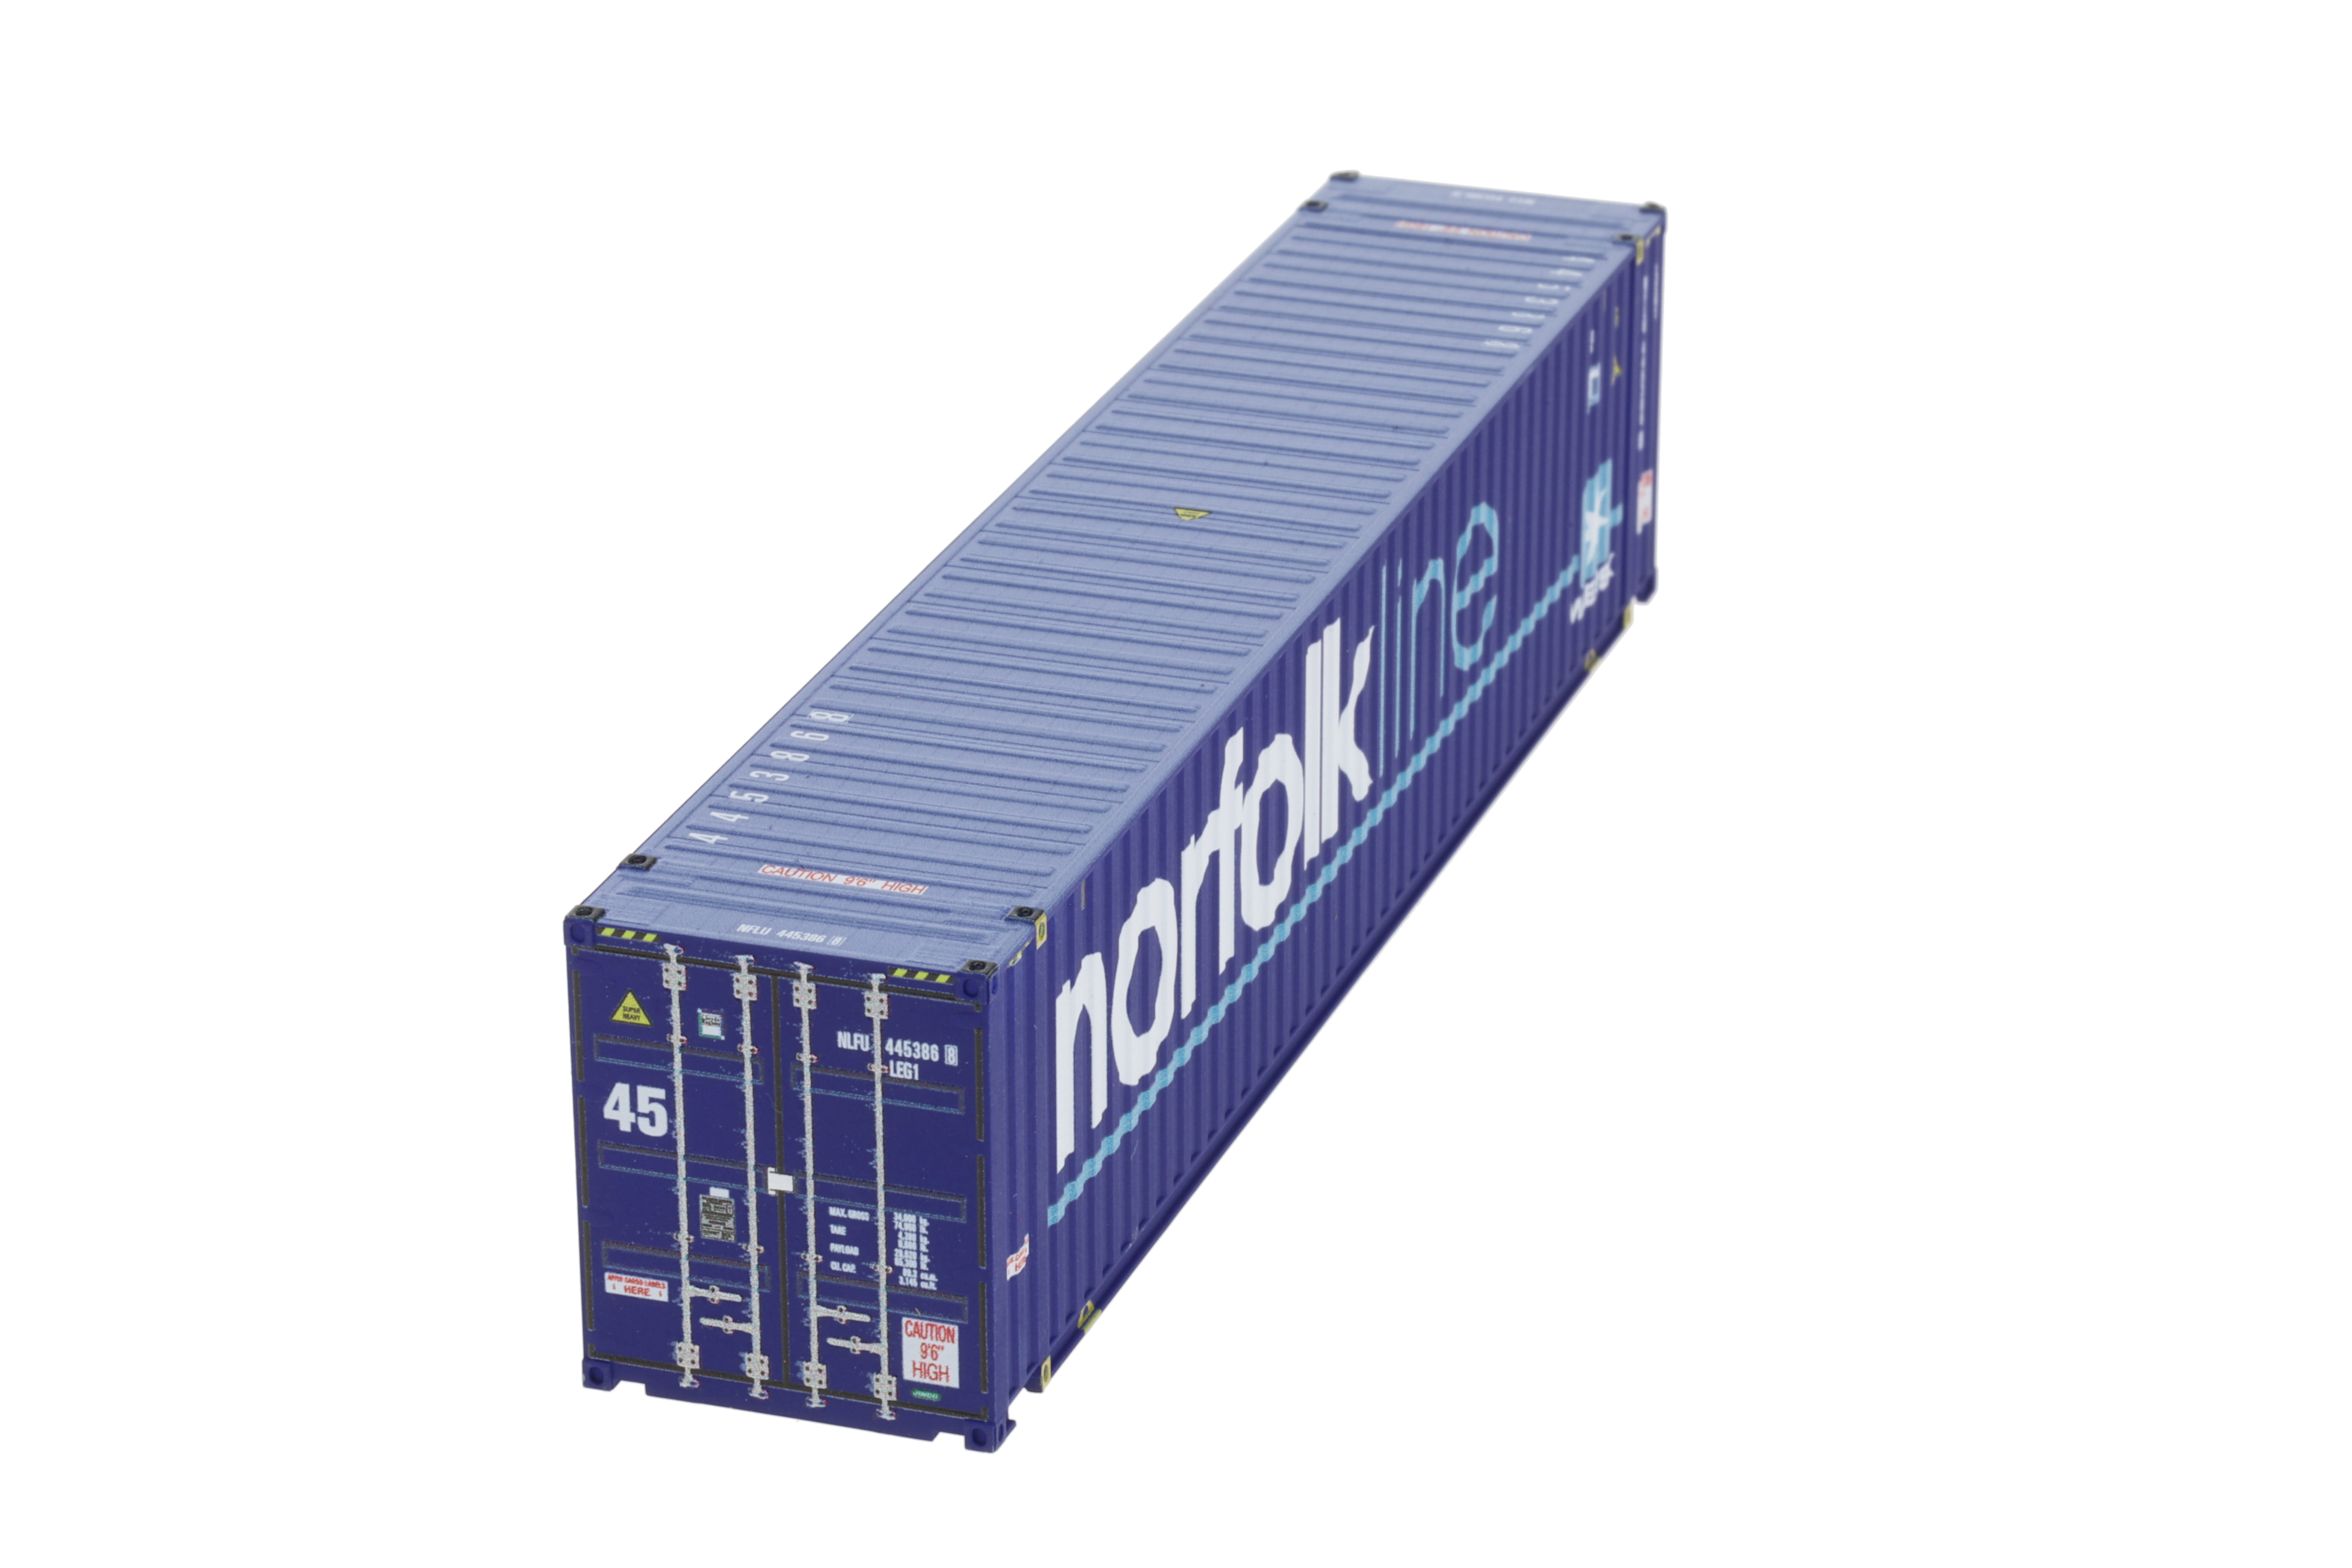 1:87 45´Container NORFOLKLINE WB-A HC (Euro), JINDO, # NFLU 445386